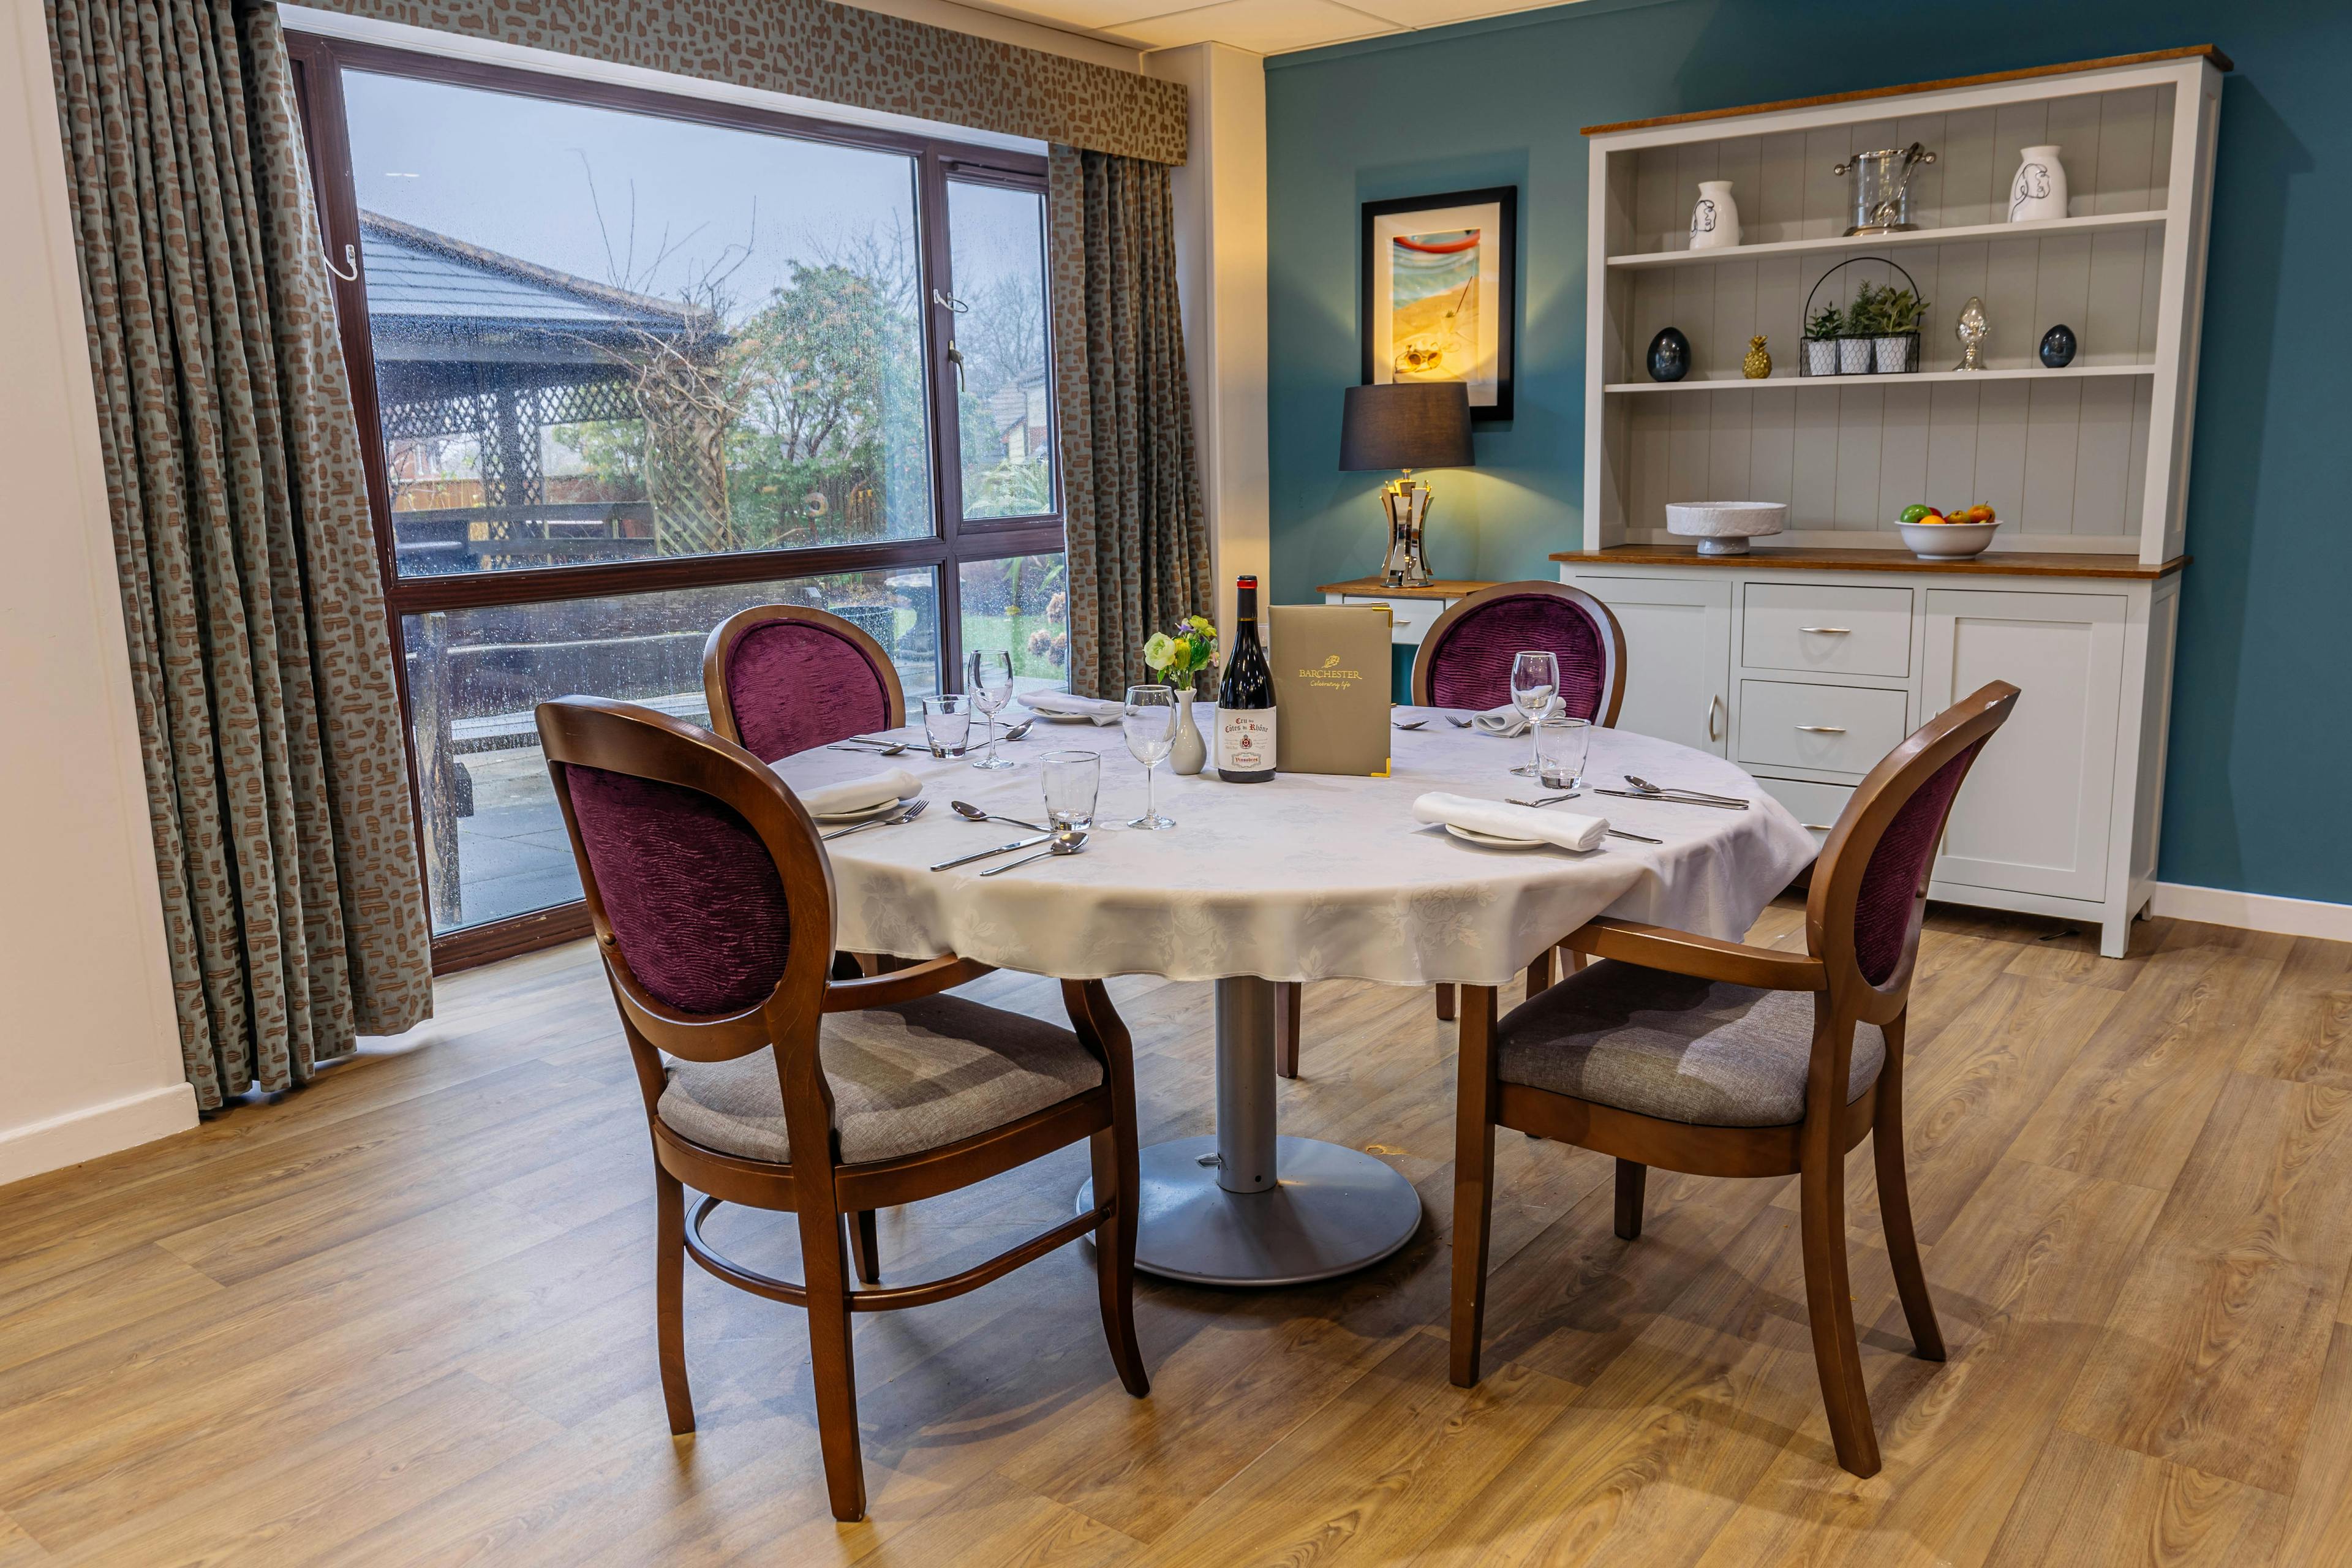 Dining area of Awel-y-Mor Care Home in Swansea, South Glamorgan